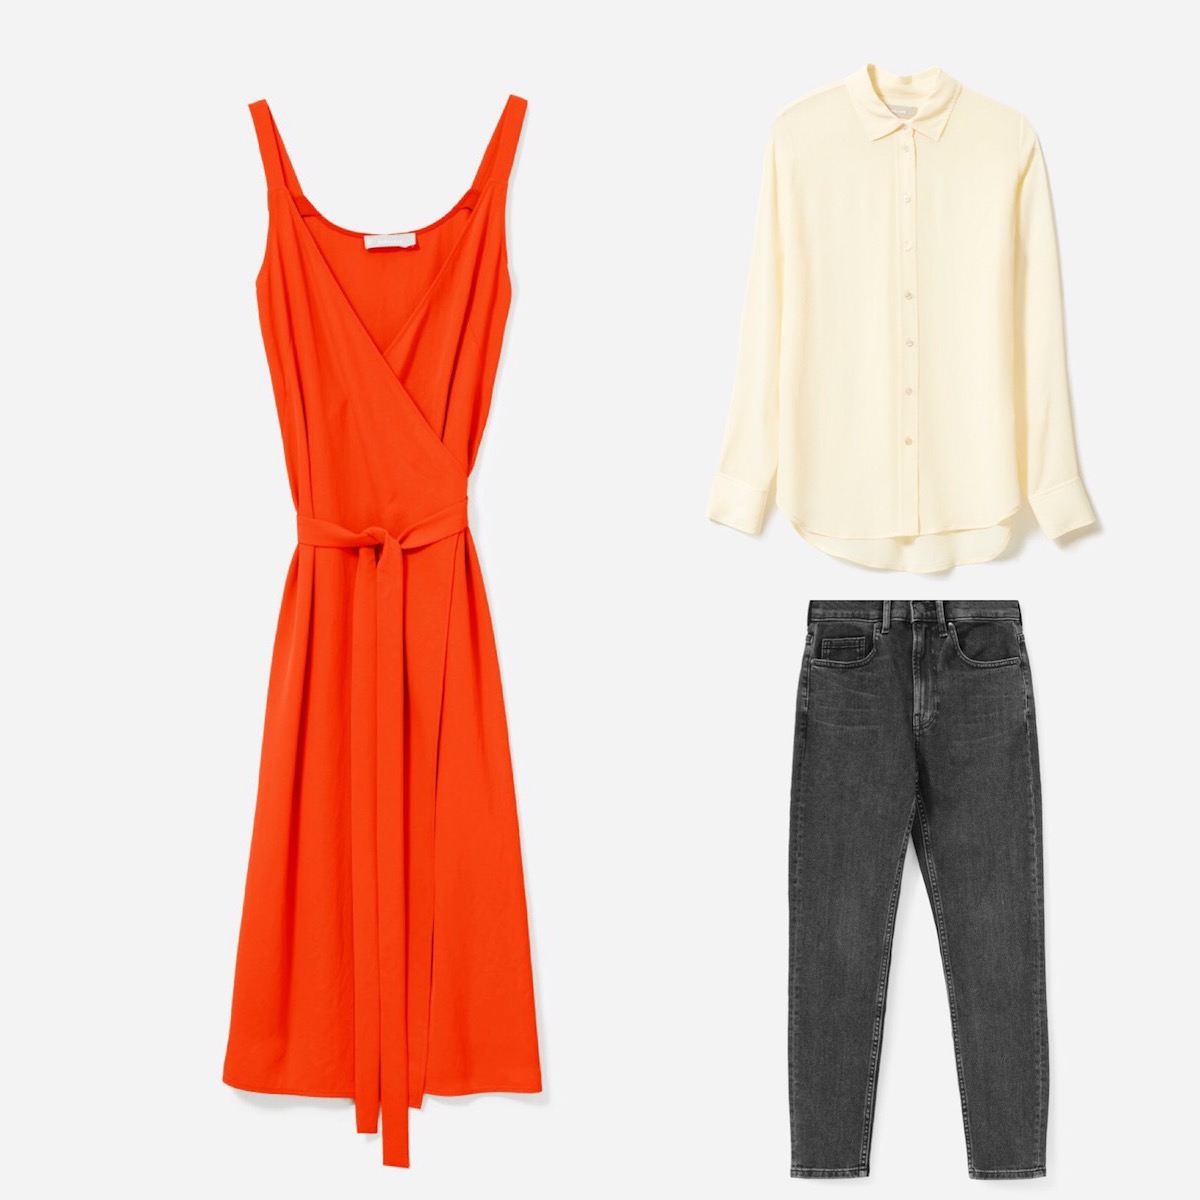 Everlane Choose What You Pay Sale: Product shot of three items against a white background: an orange red dress, a yellow silk shirt, and black jeans.